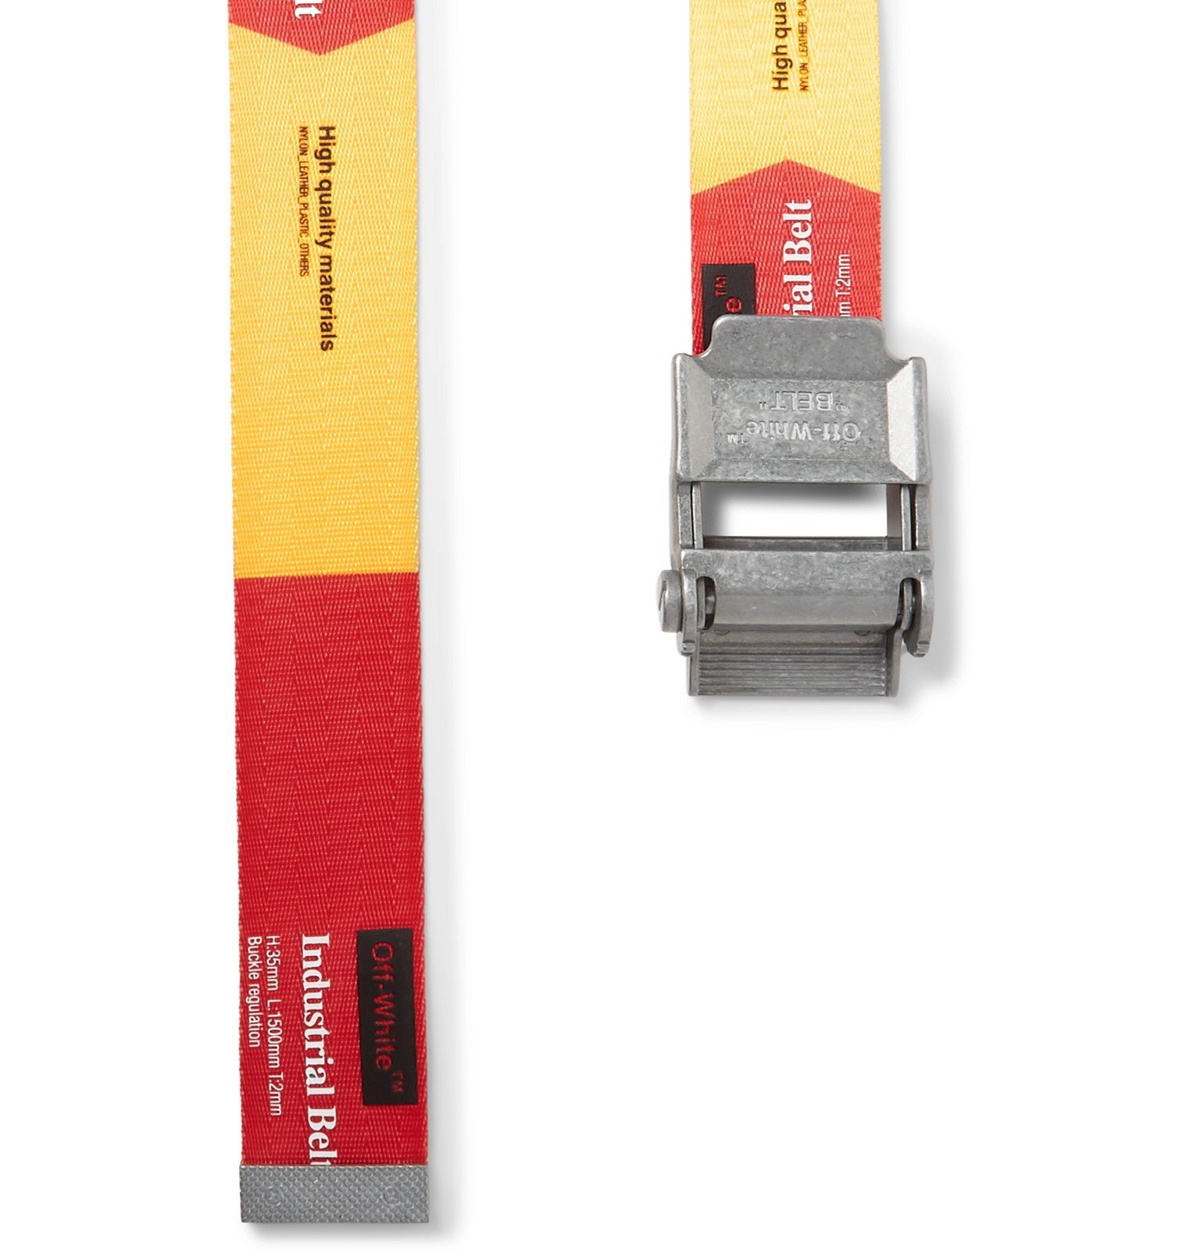 Off-White™ Releases New Red & Yellow Industrial Belts